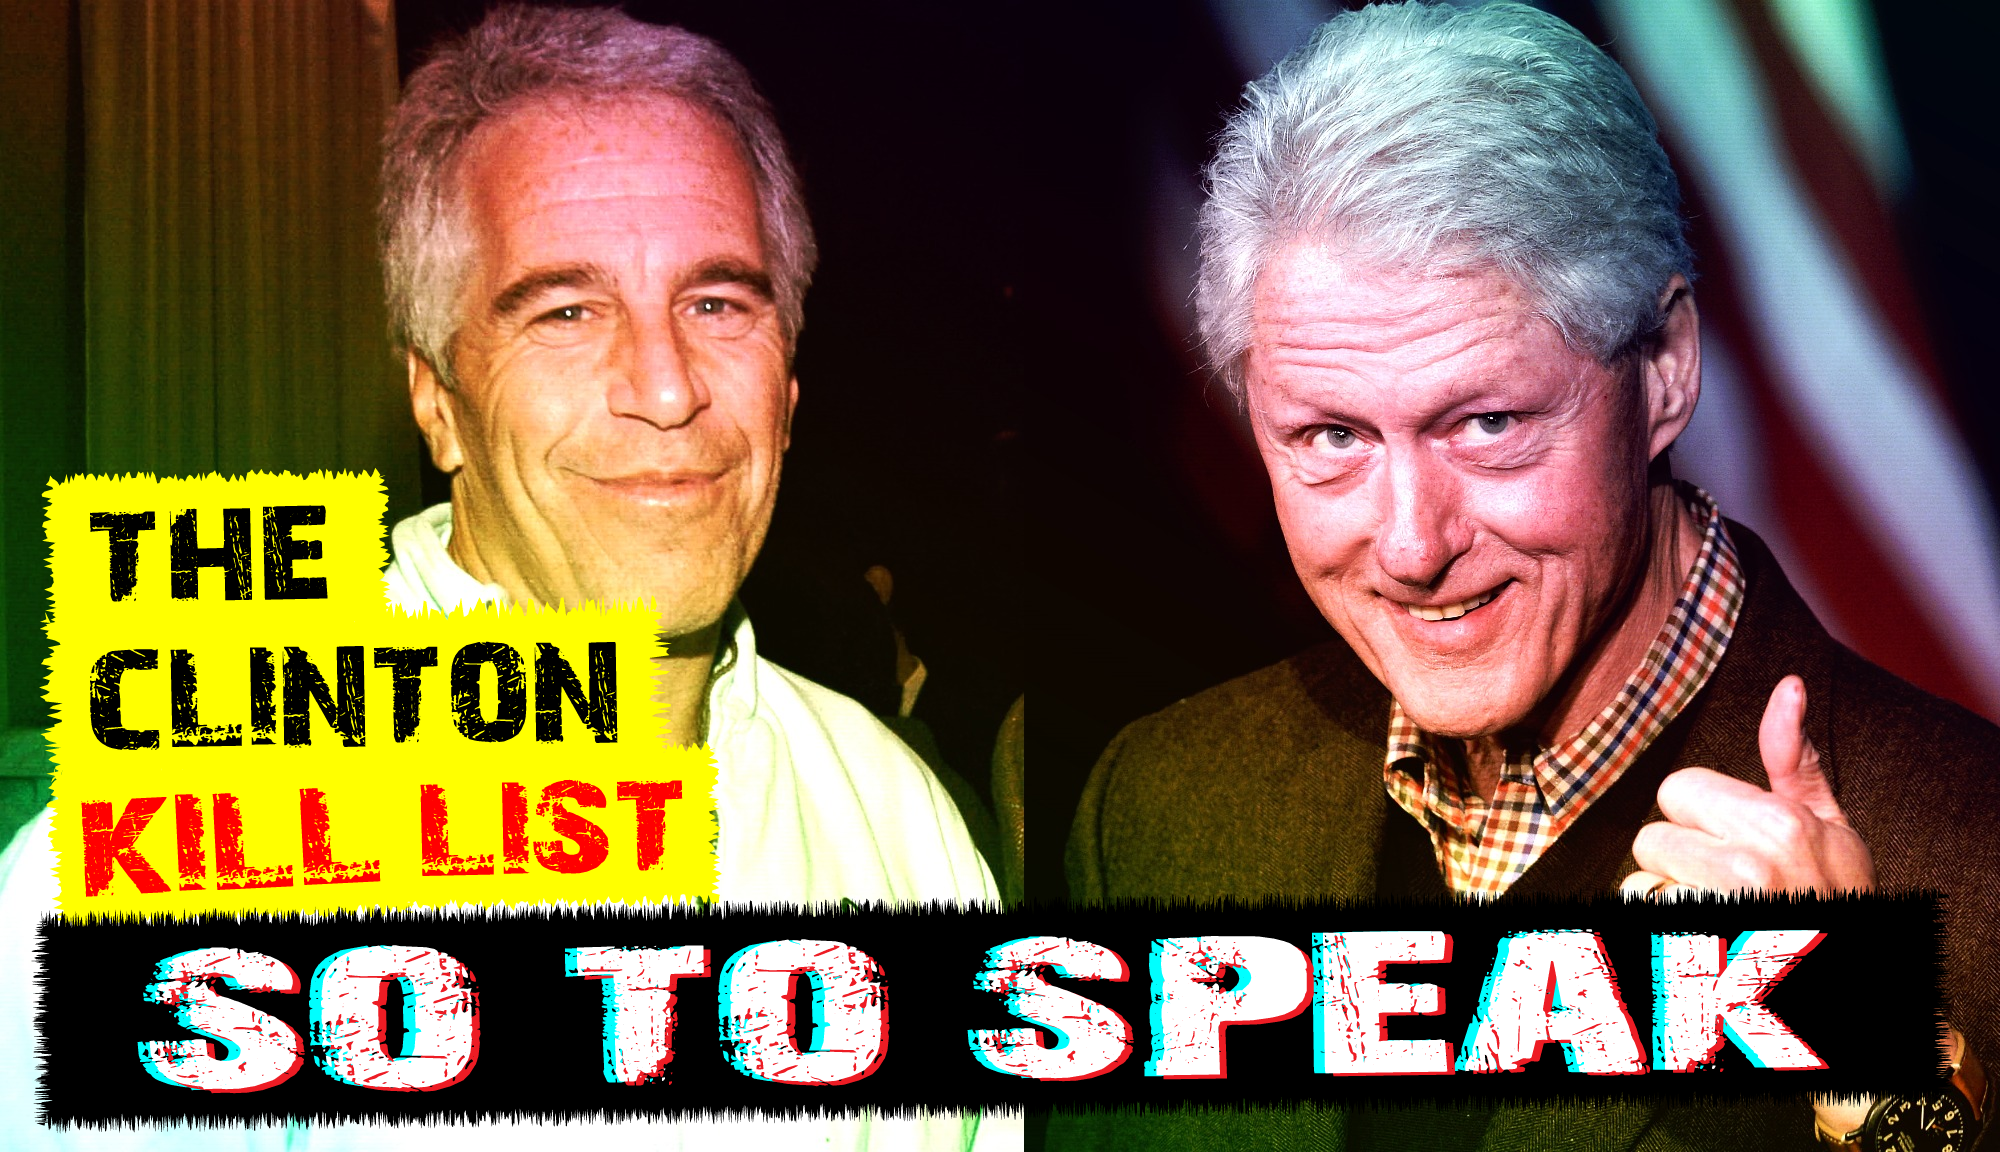 The Clinton Kill List just got a little bit longer with the death of Jeffrey Epstein and Betsy Ebeling